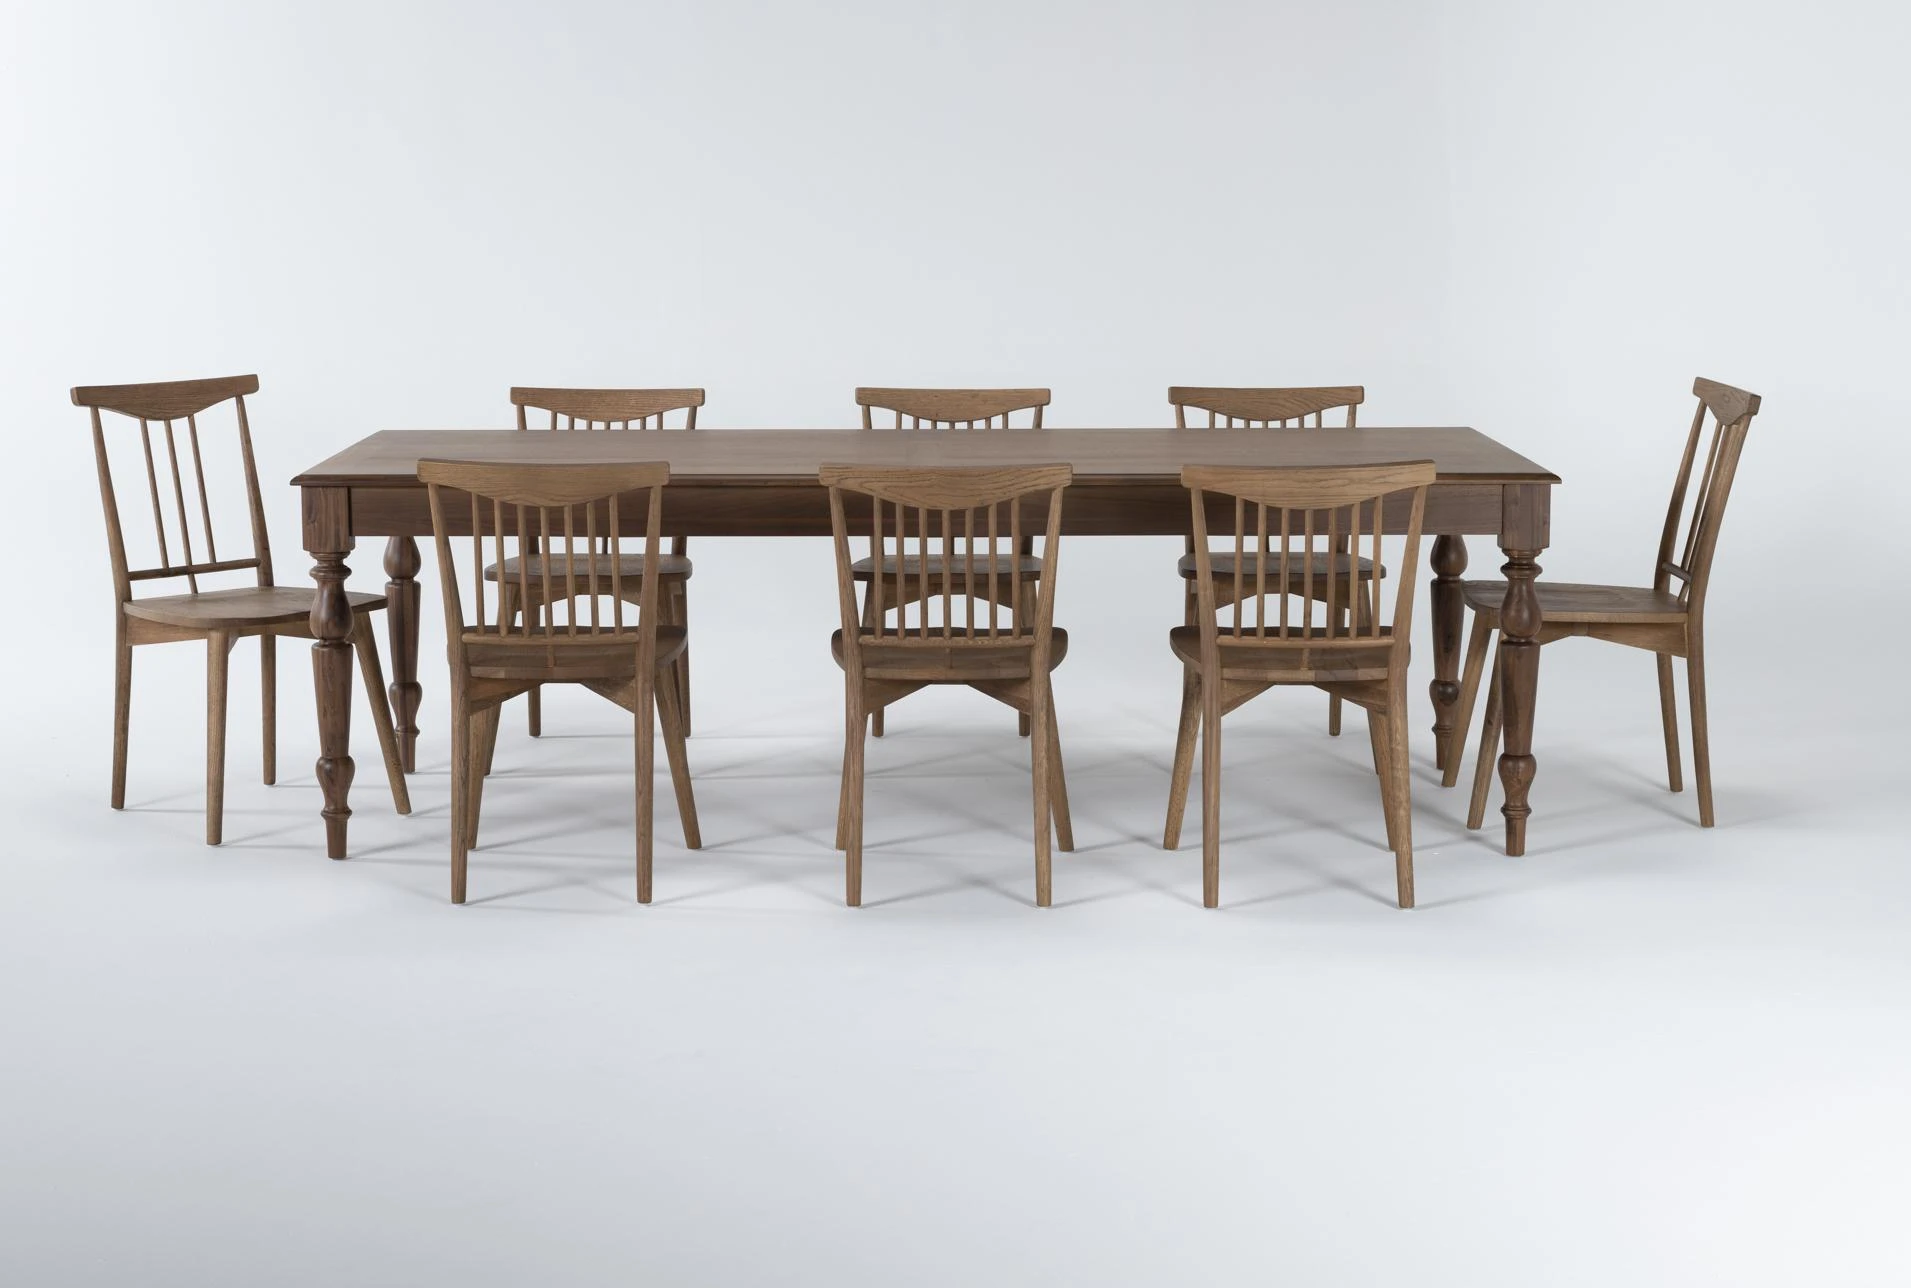 6 Chairs Modern Dining Table and Chairs Set of 6 Solid Pine Kitchen Table and Chairs Set Dining Room Furniture 1 Table 7Pcs Dining Set